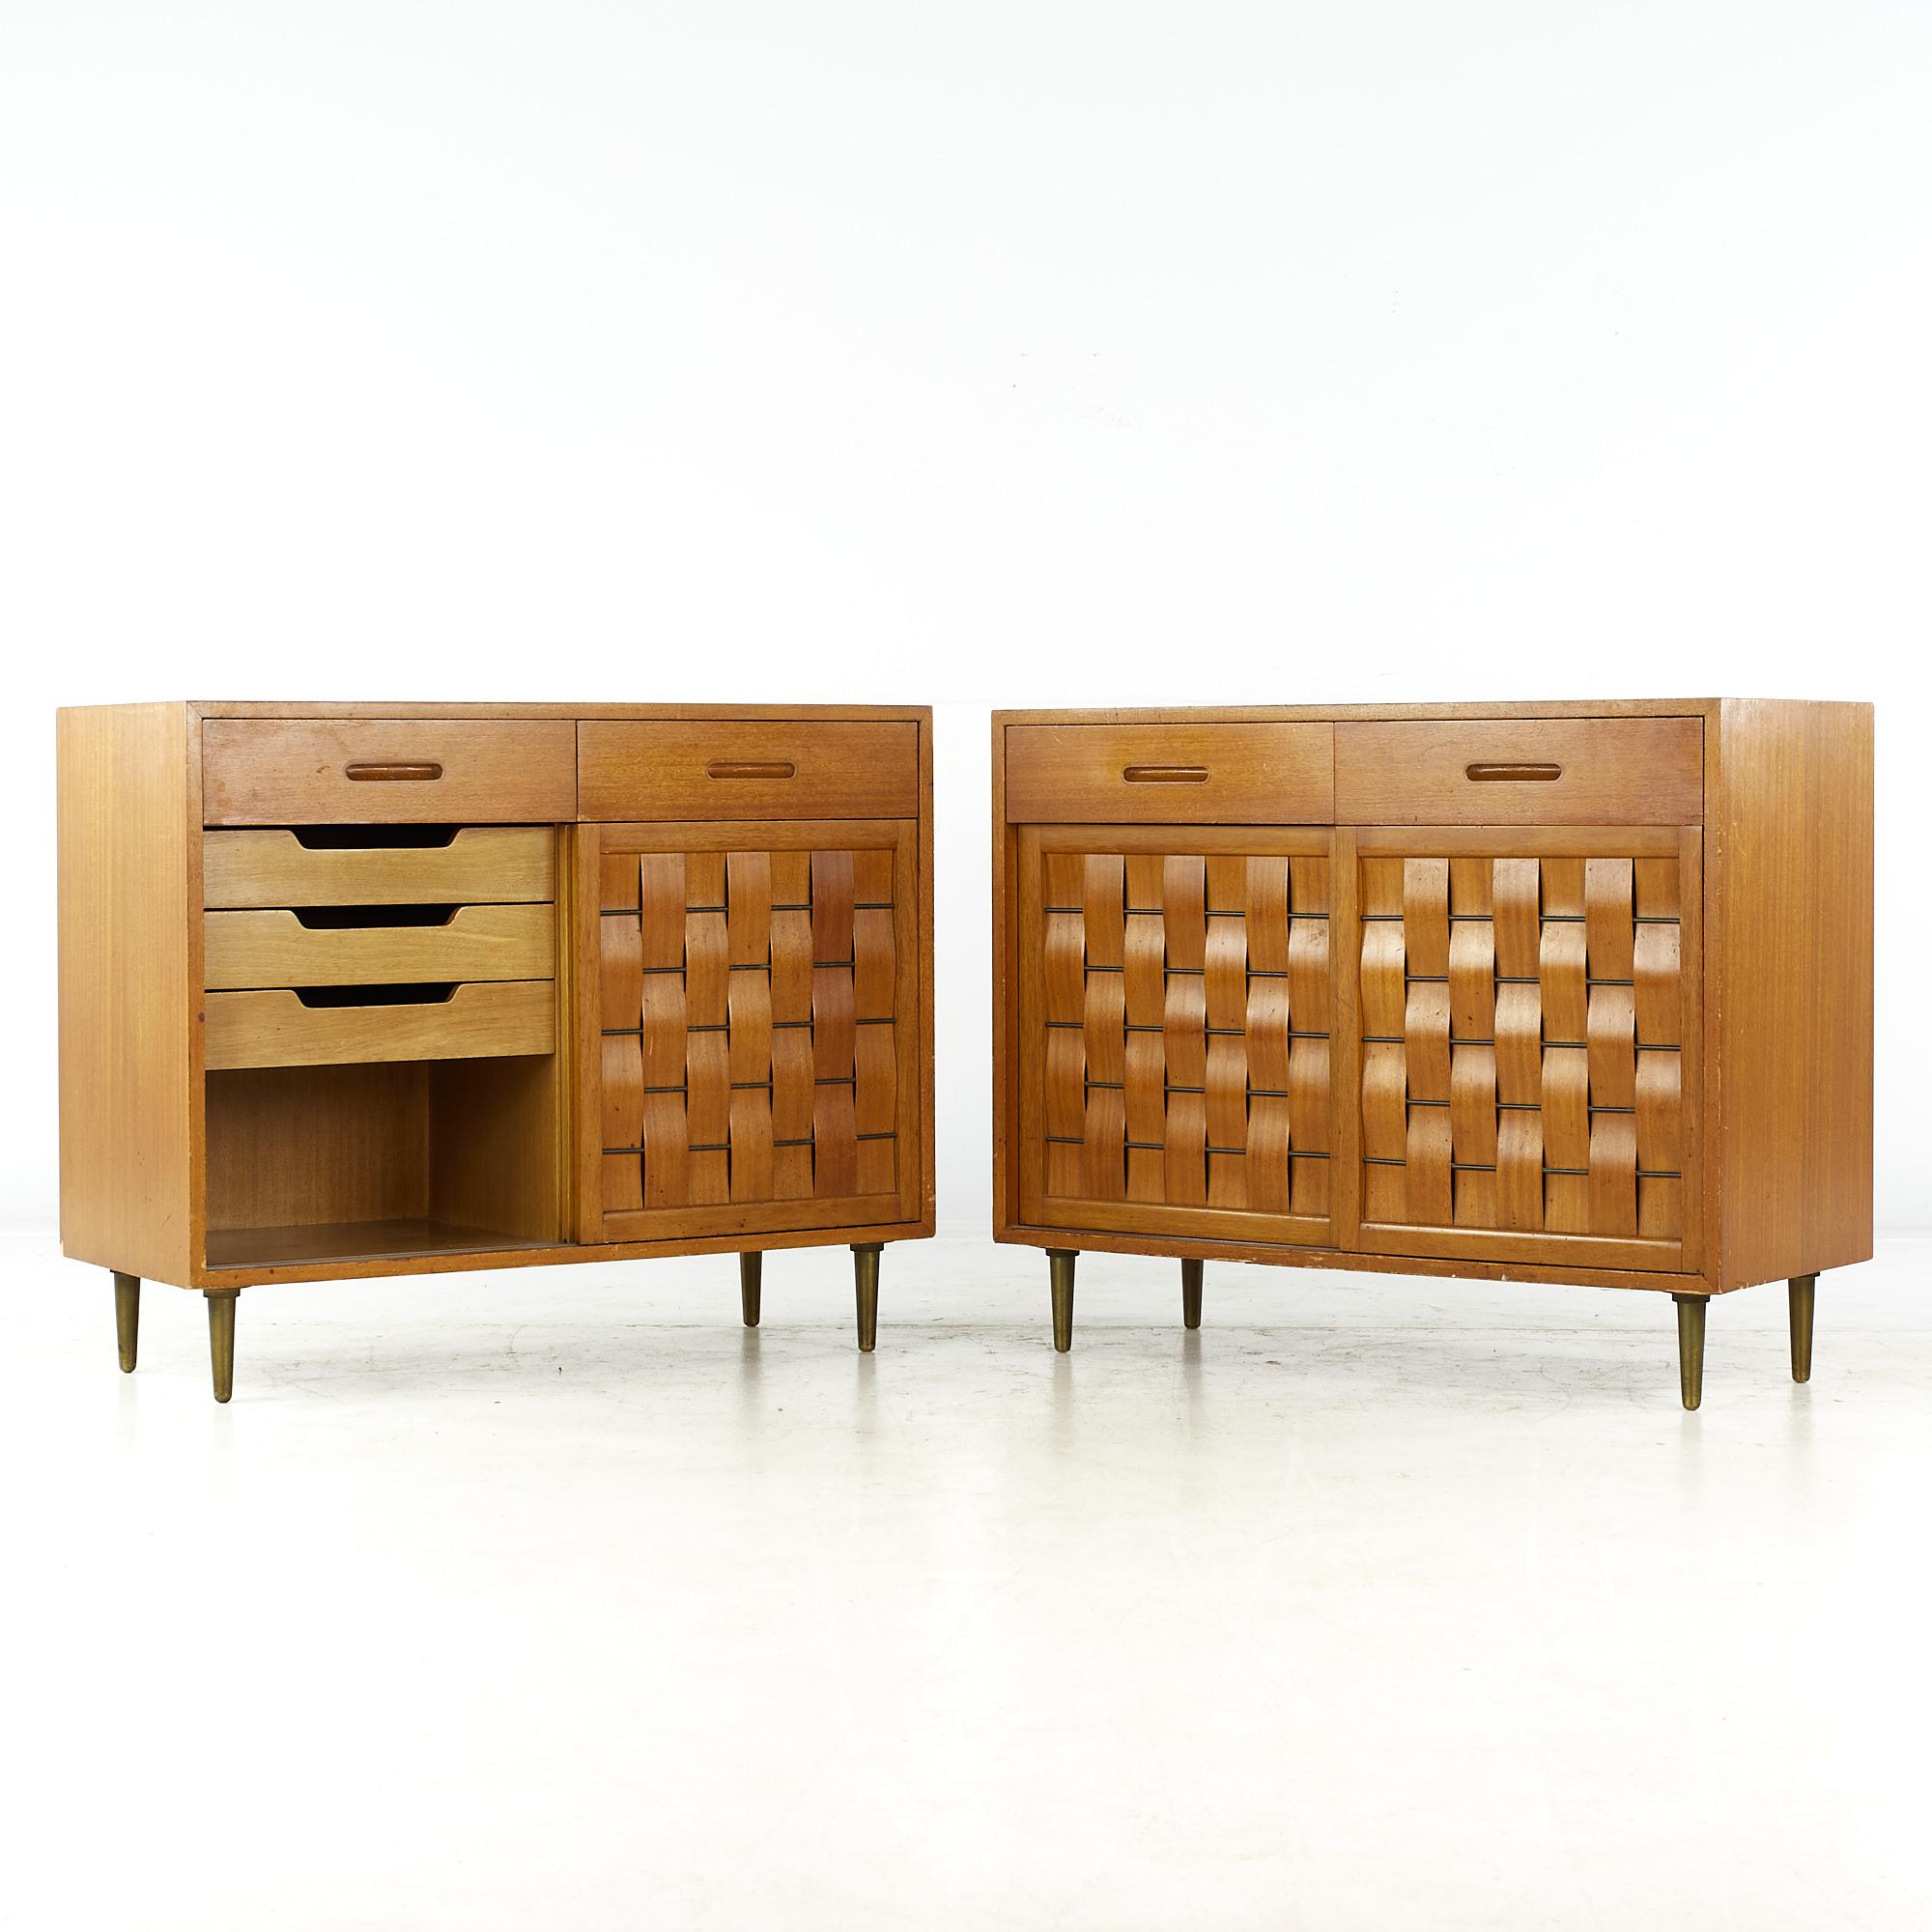 Mid-Century Modern Edward Wormley for Dunbar Mcm Bleached Mahogany Sliding Door Credenza, Pair For Sale